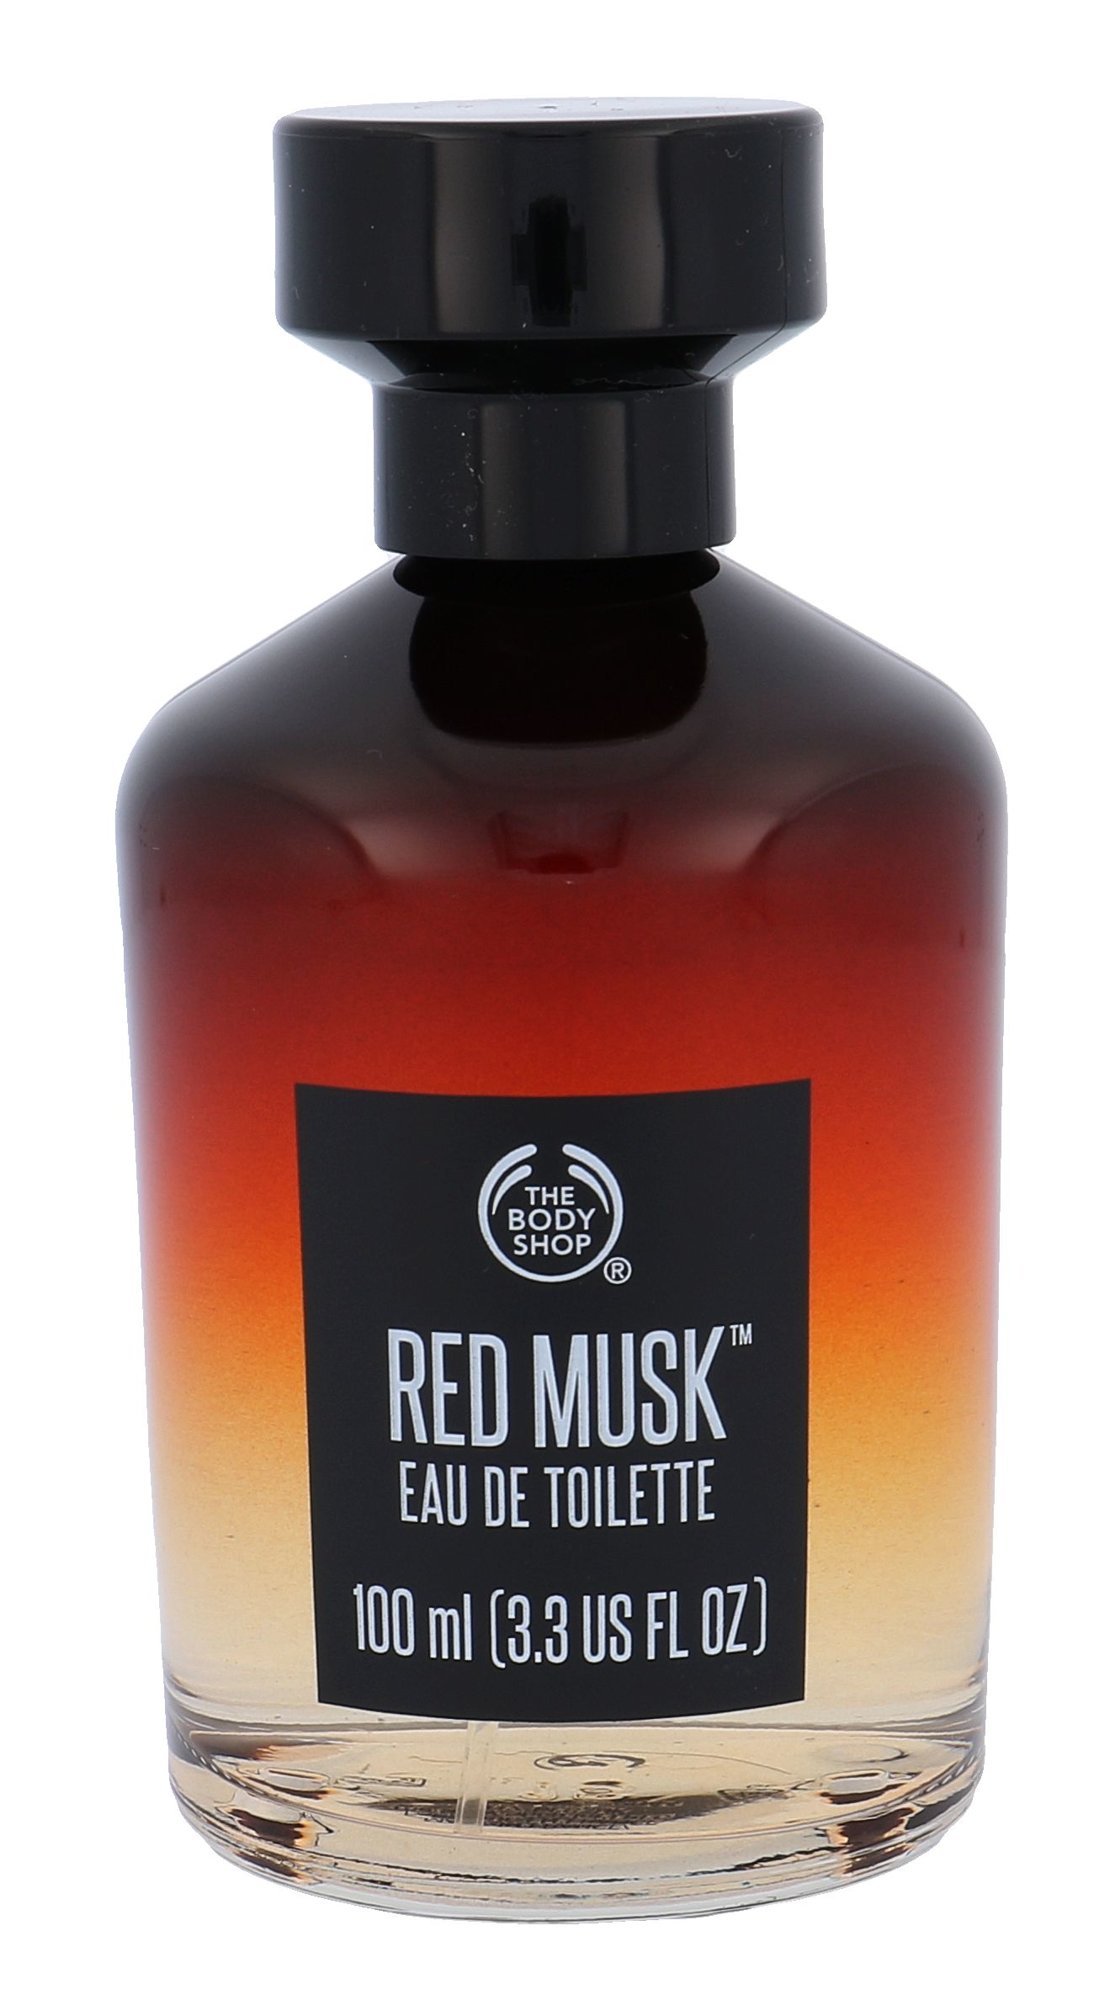 The Body Shop Red Musk